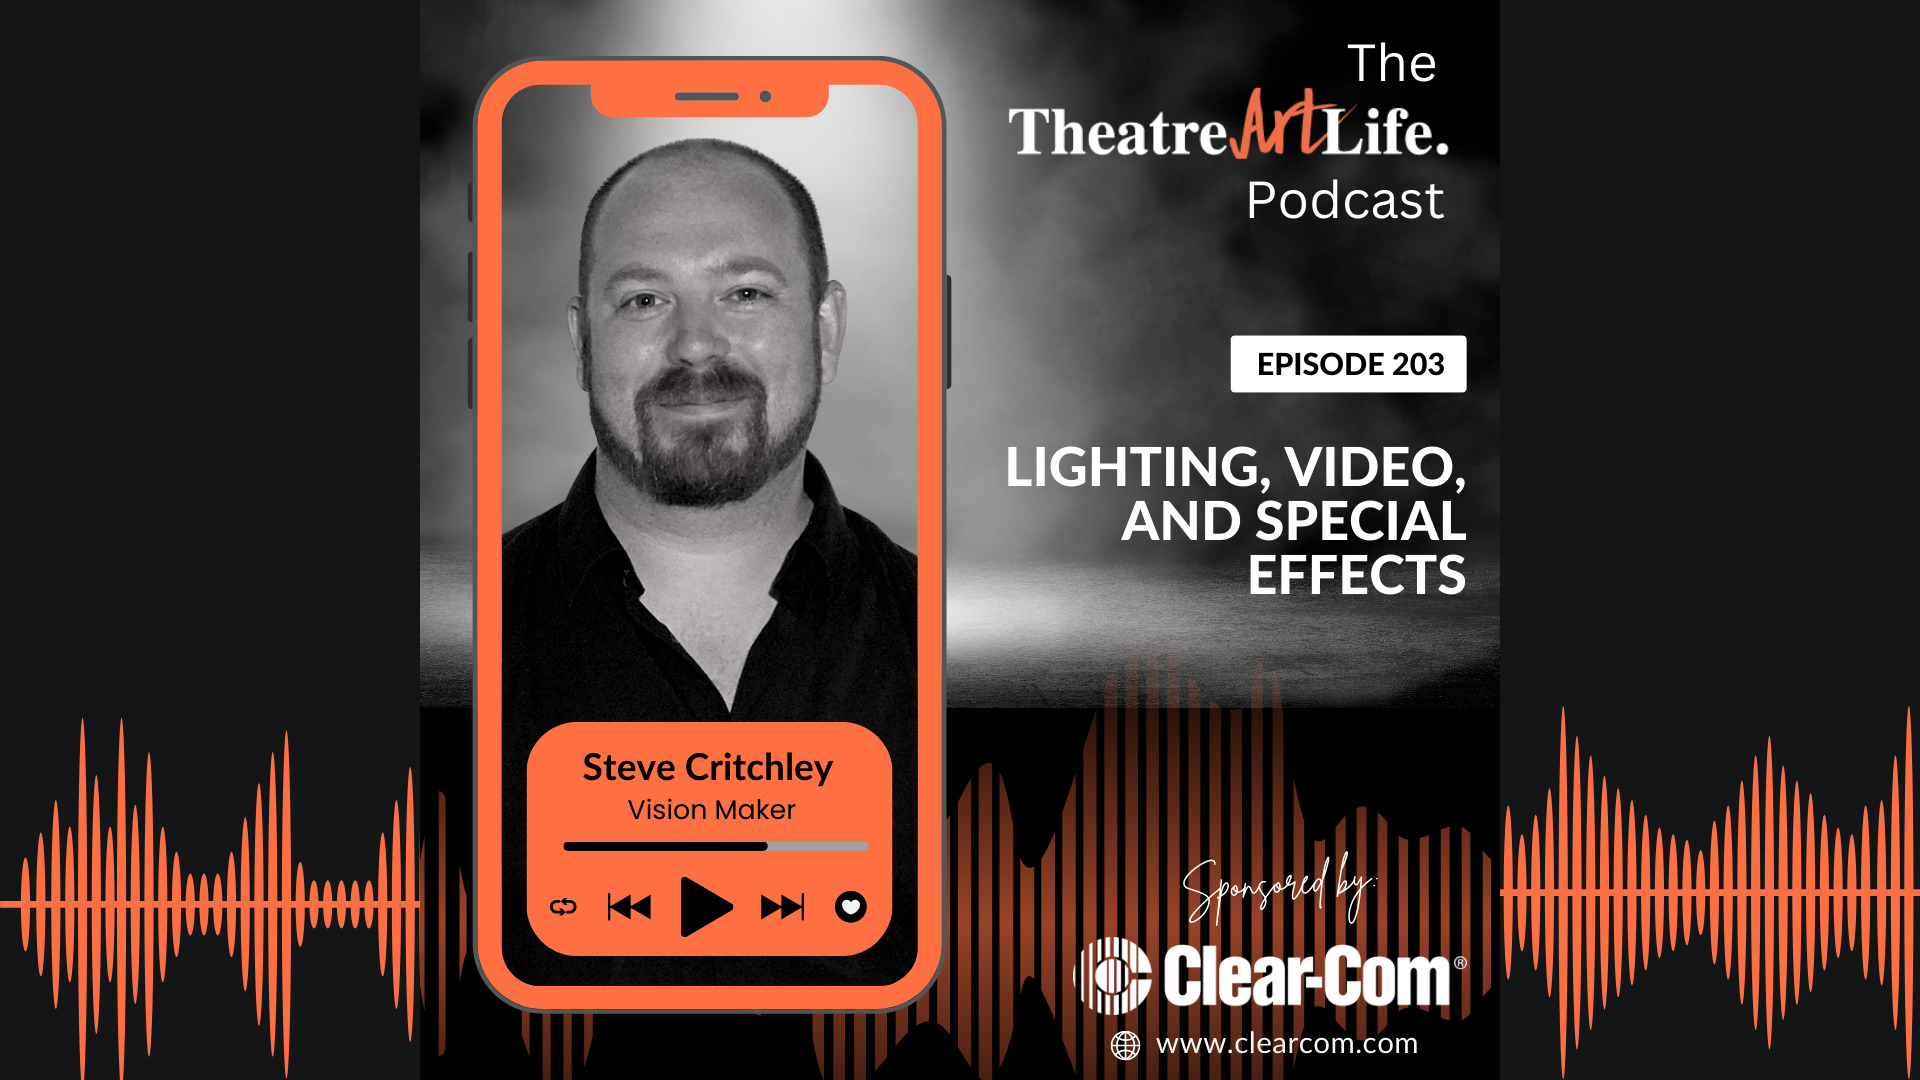 Theater Art Life Podcast – Lighting, Video, and Special Effects with Steve Critchley  (Episode 203)